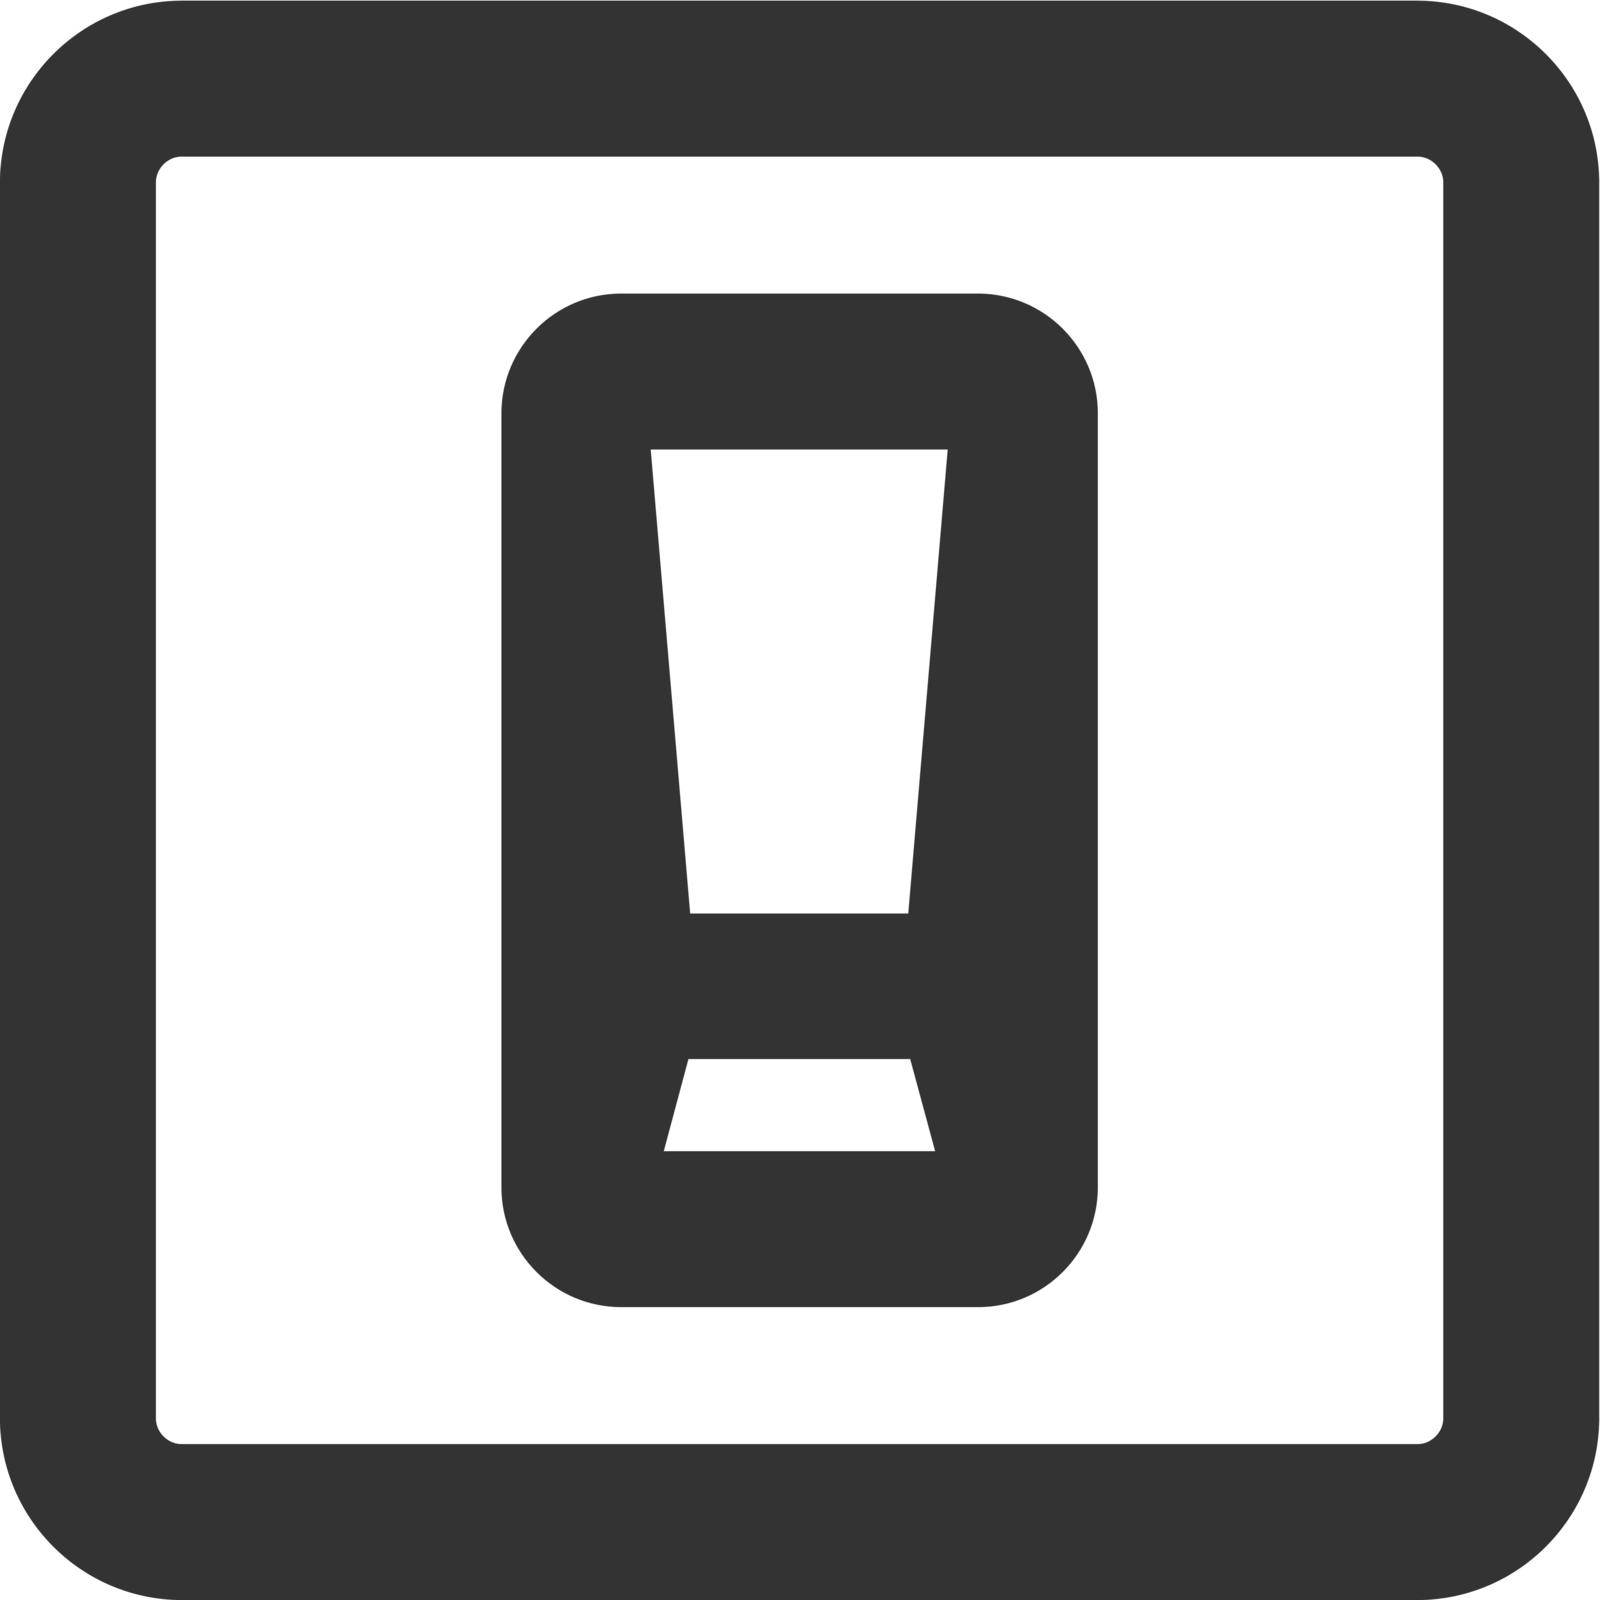 Outline Icon - Electric switch by puruan